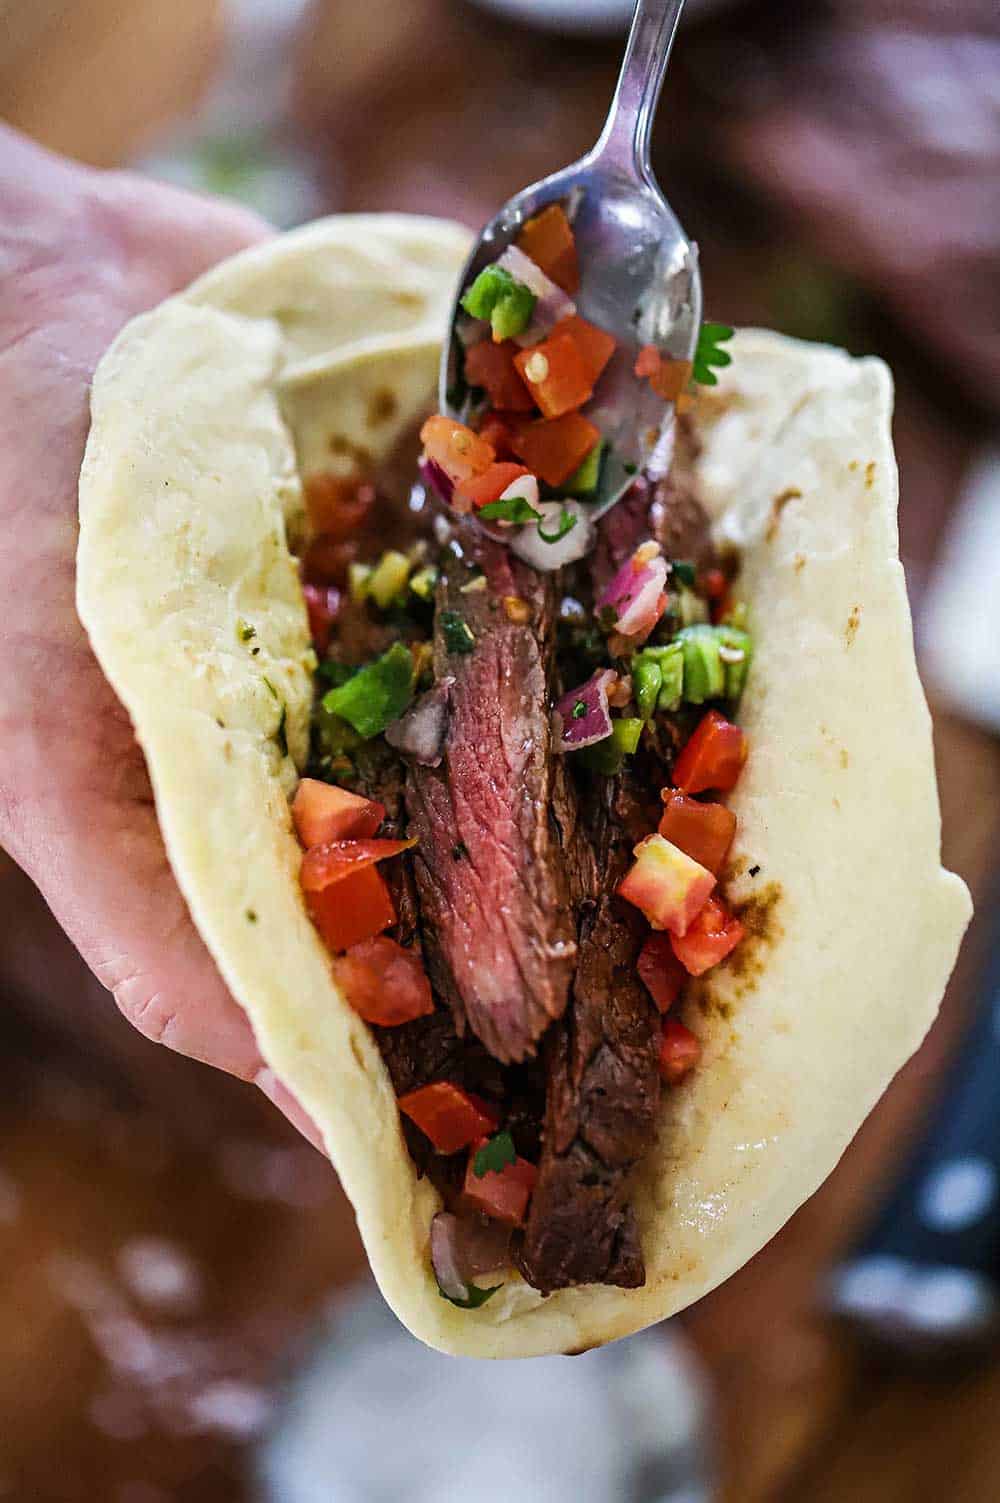 A person holding a flour tortilla that is filled with sliced carne asada and topped with pico de gallo.